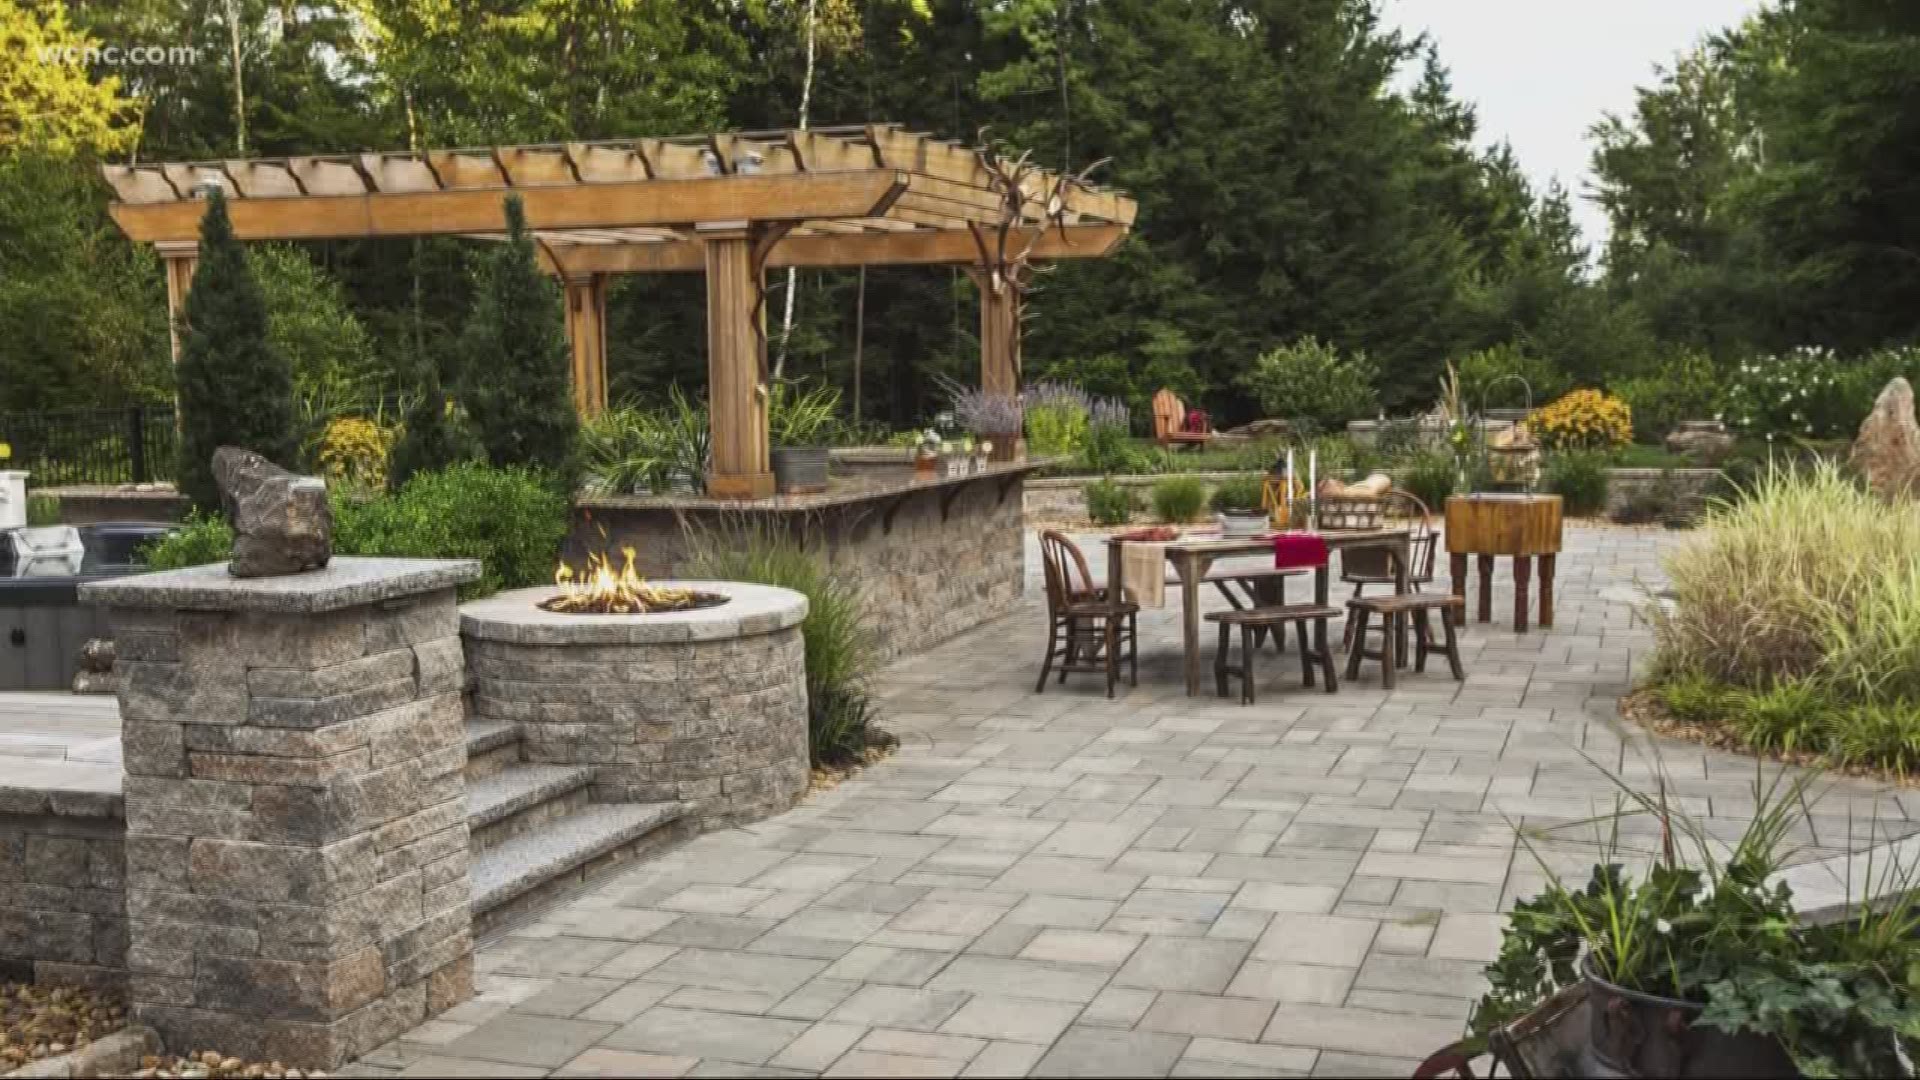 John Difiore shows us just how beautiful your outdoor space could be